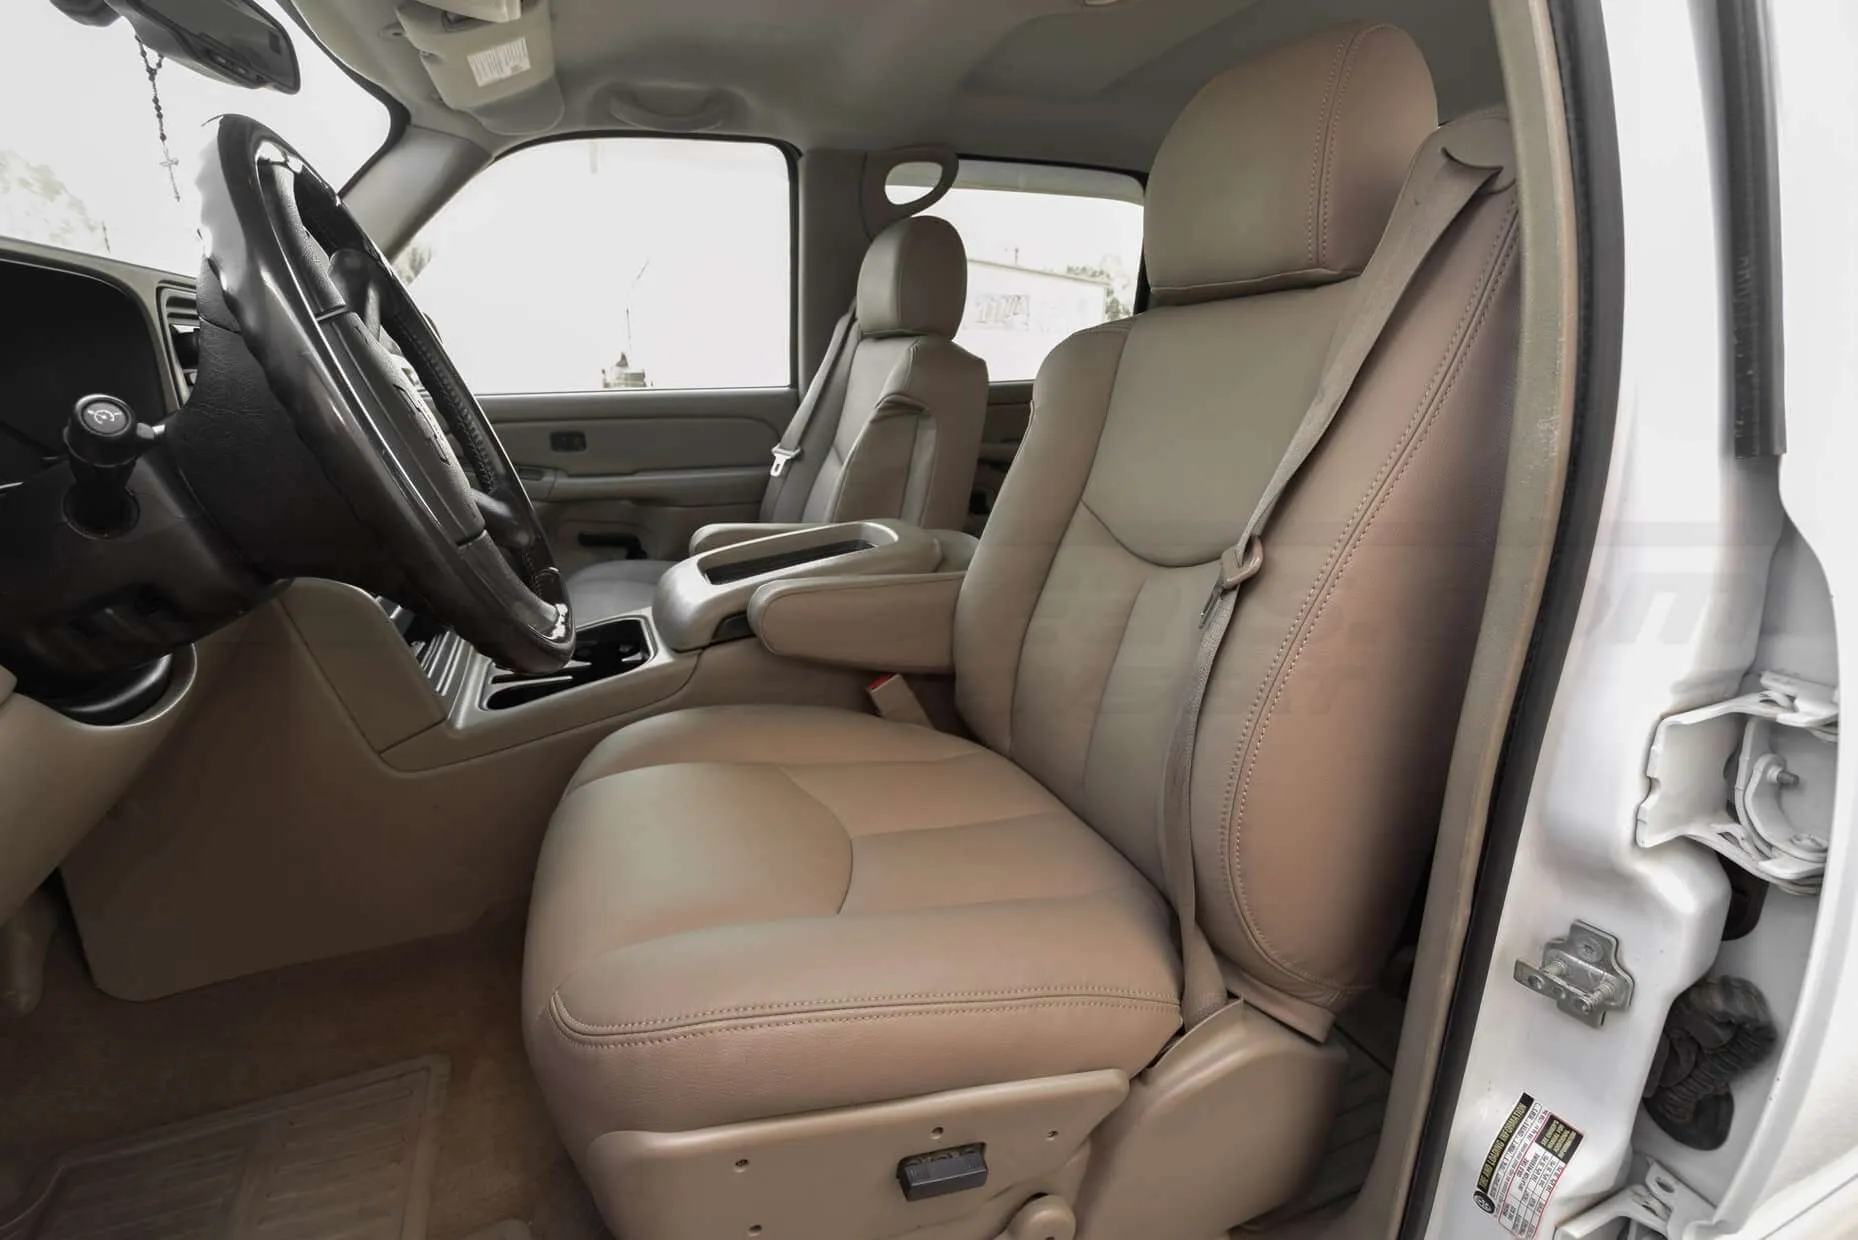 Chevy Silverado with Desert leather seats